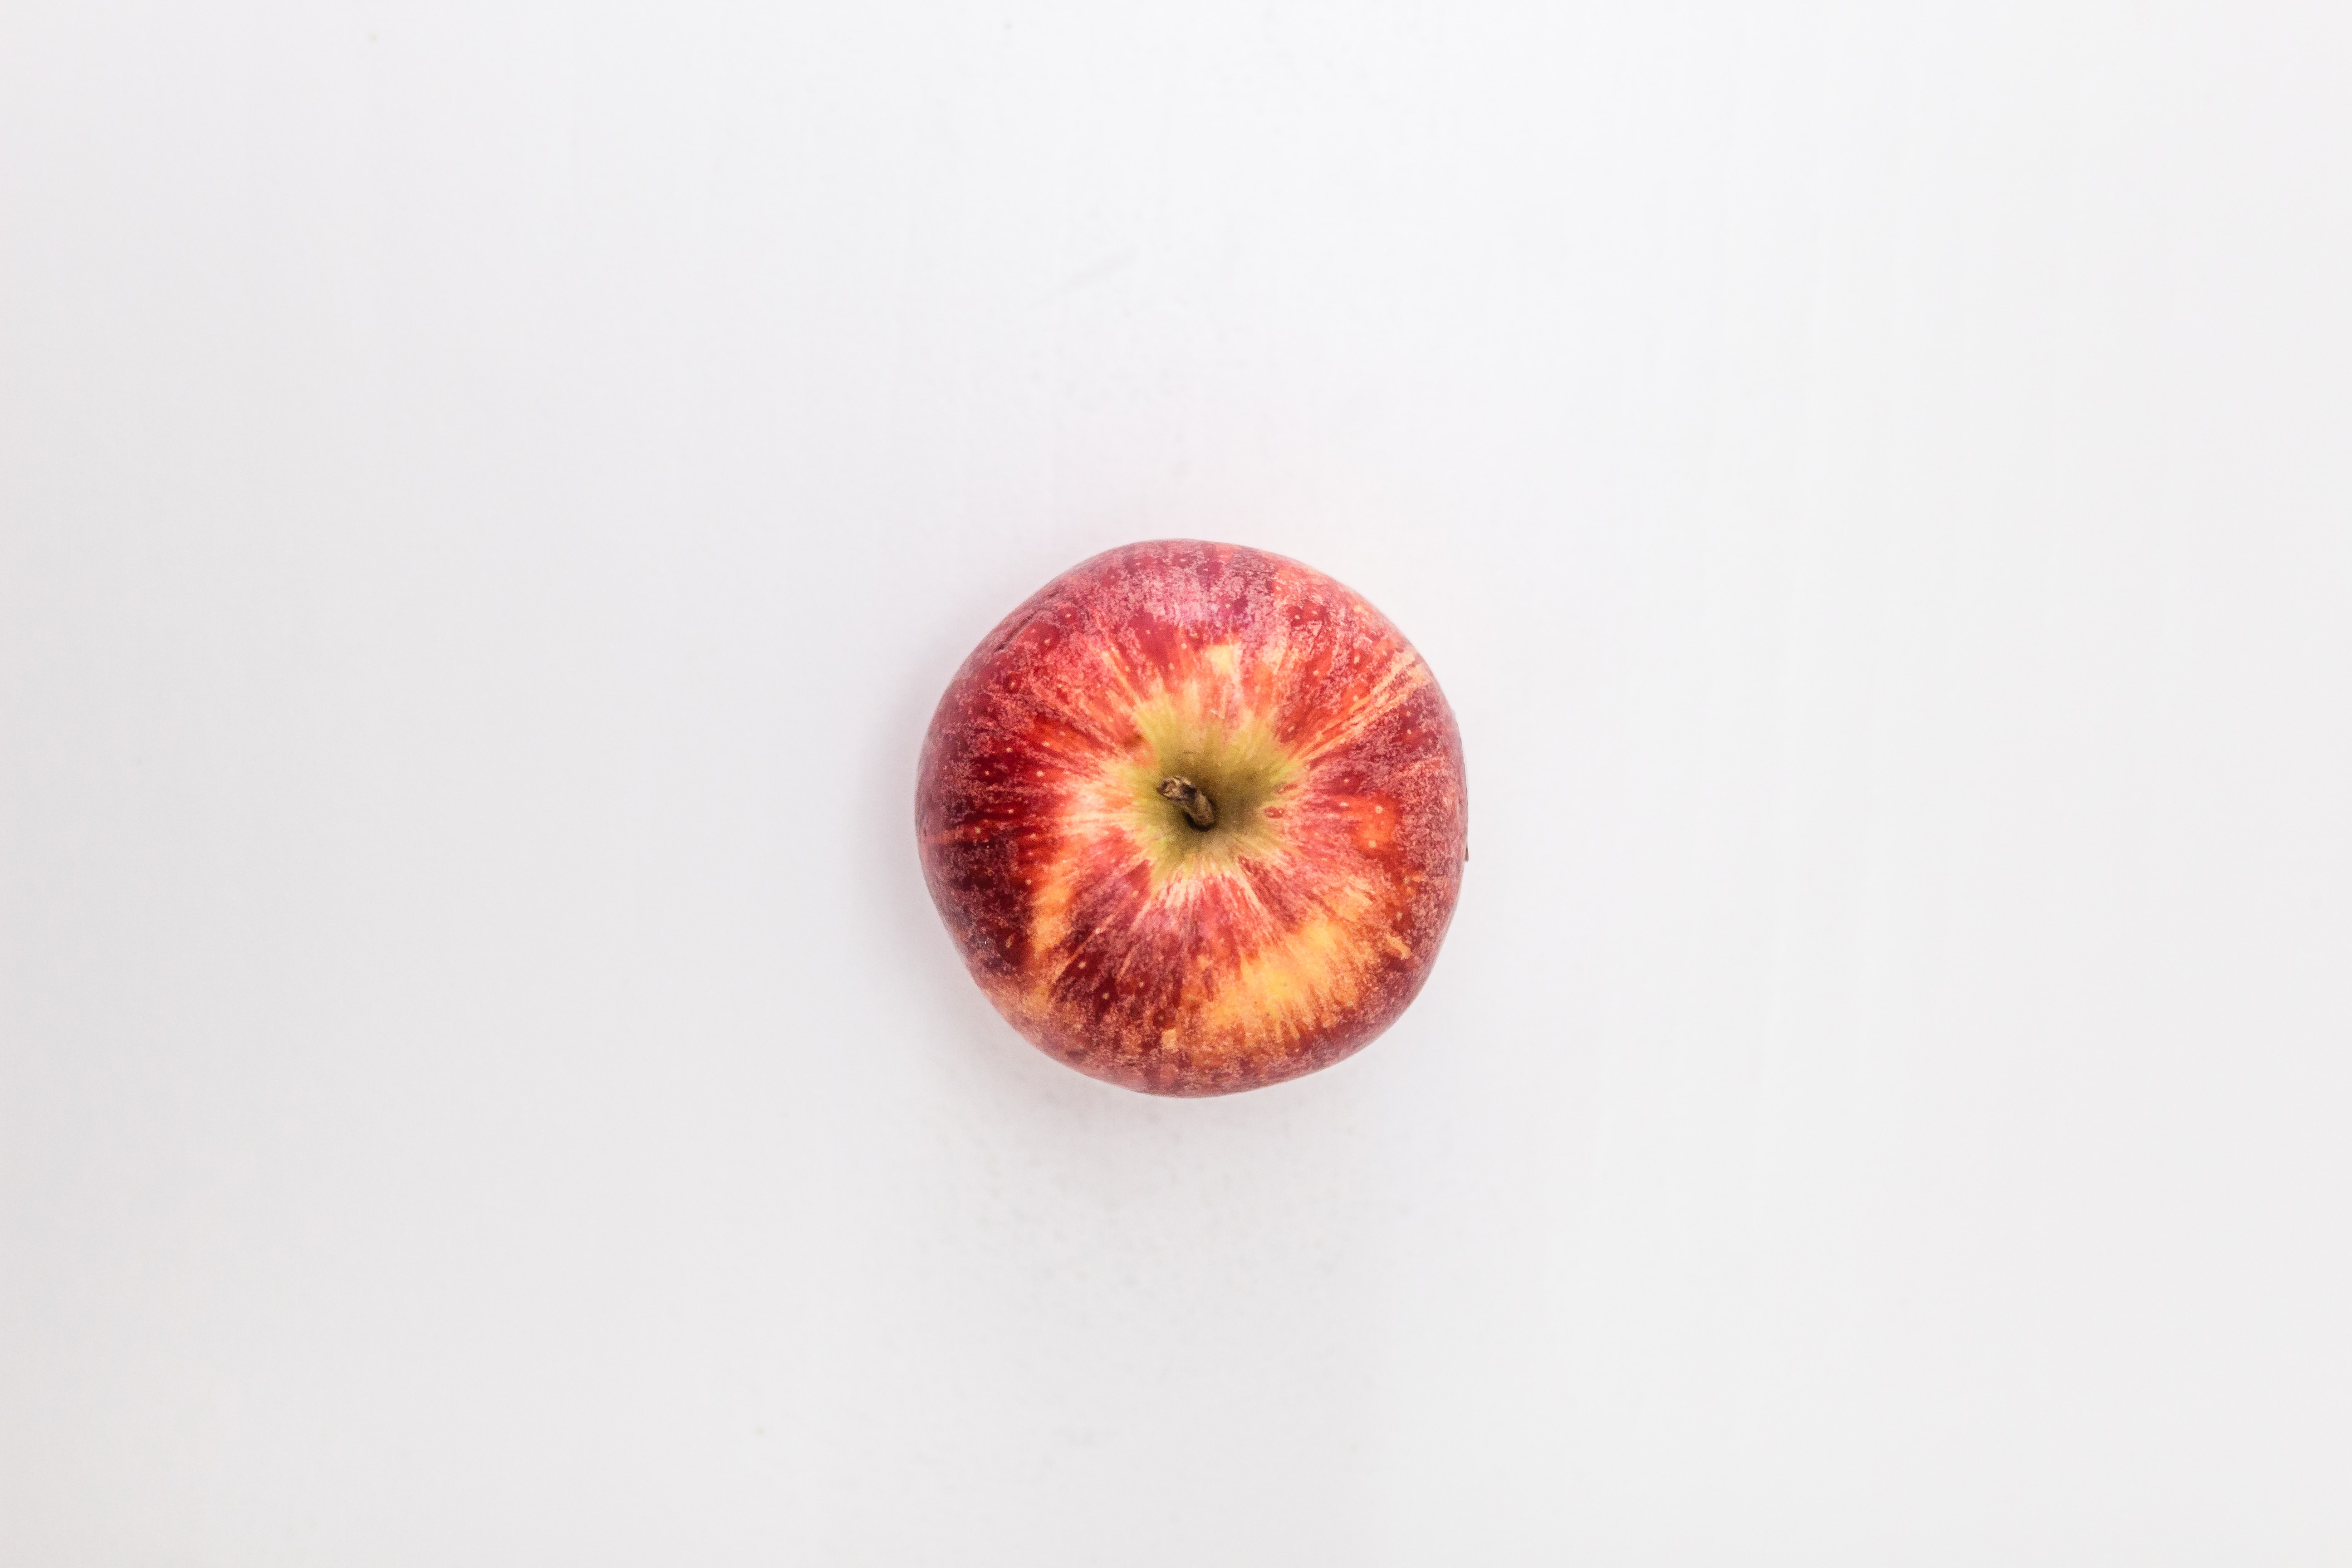 picture of an apple